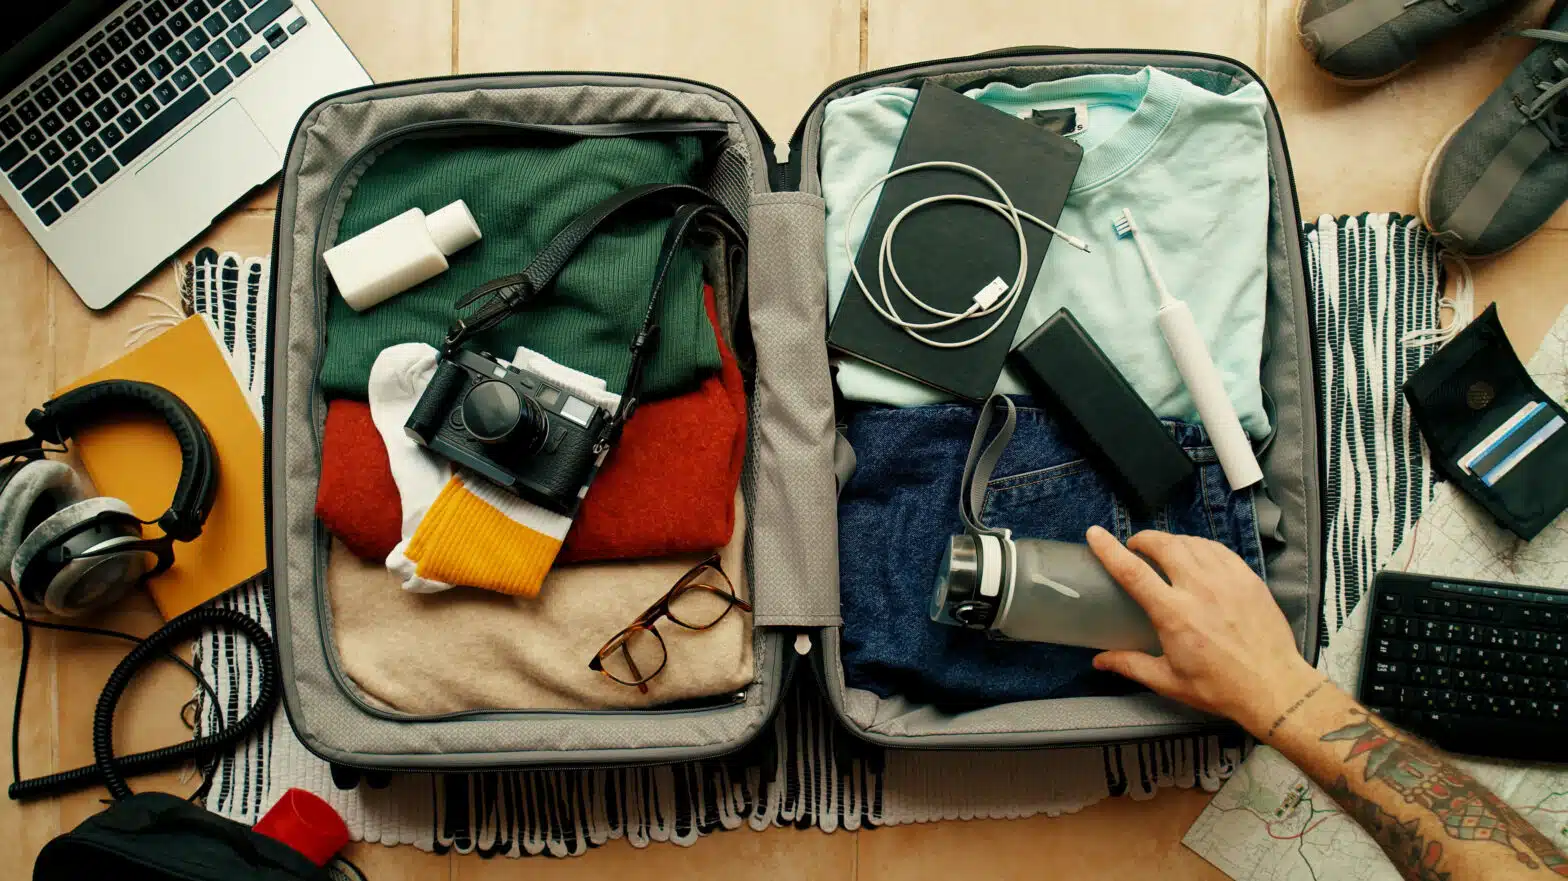 A man puts a water bottle into a suit case - How To Convince My Loved One To Travel For Rehab